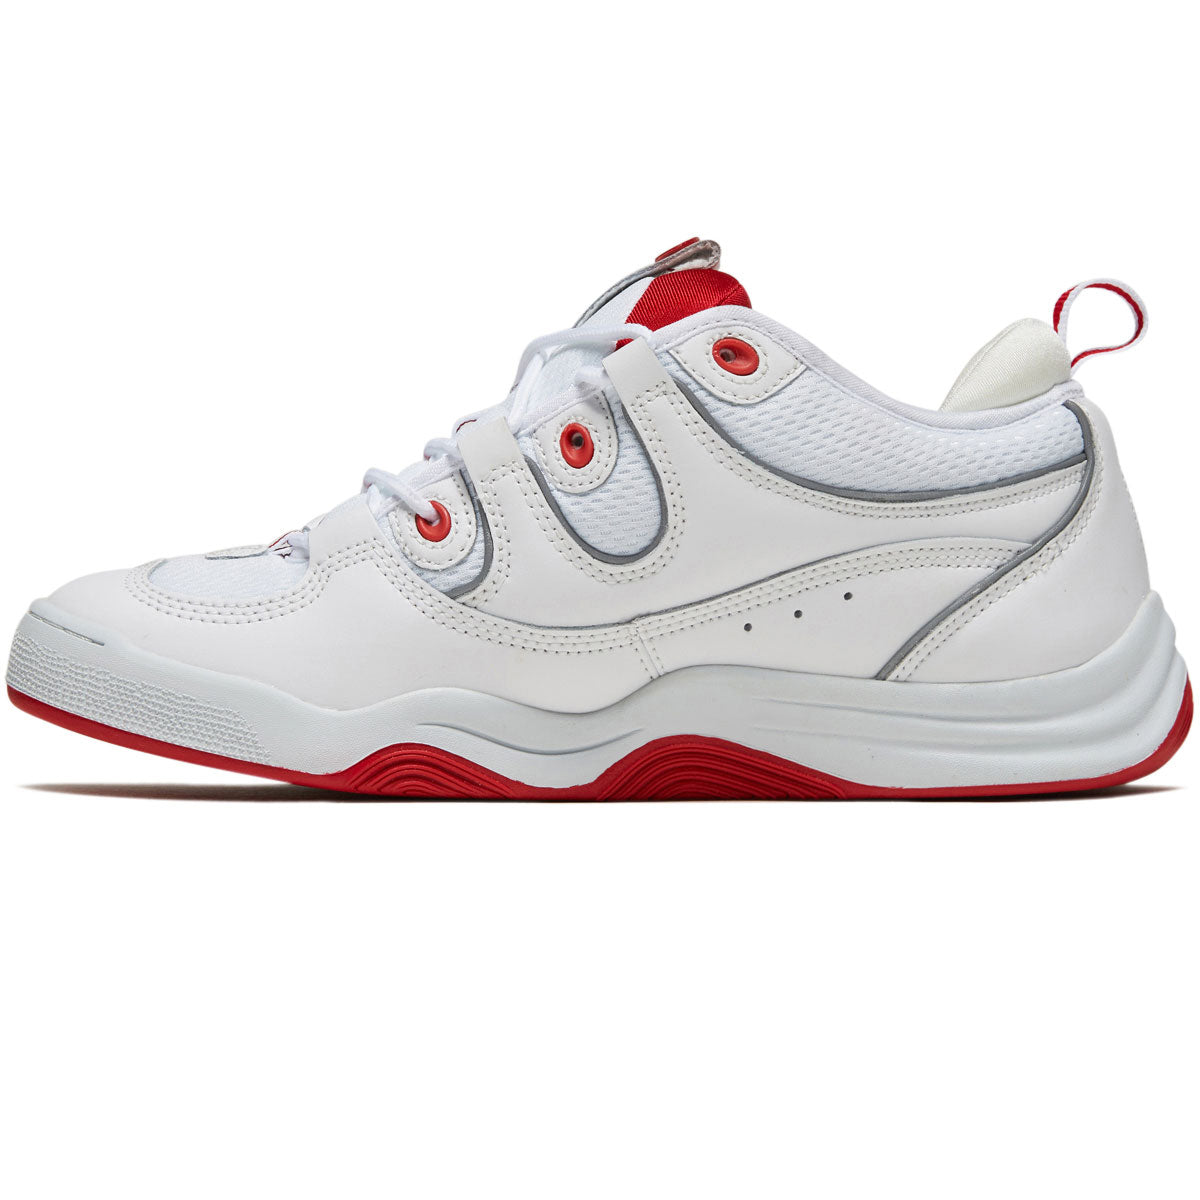 eS Two Nine 8 Skate Shop Day Shoes - White/Red image 2